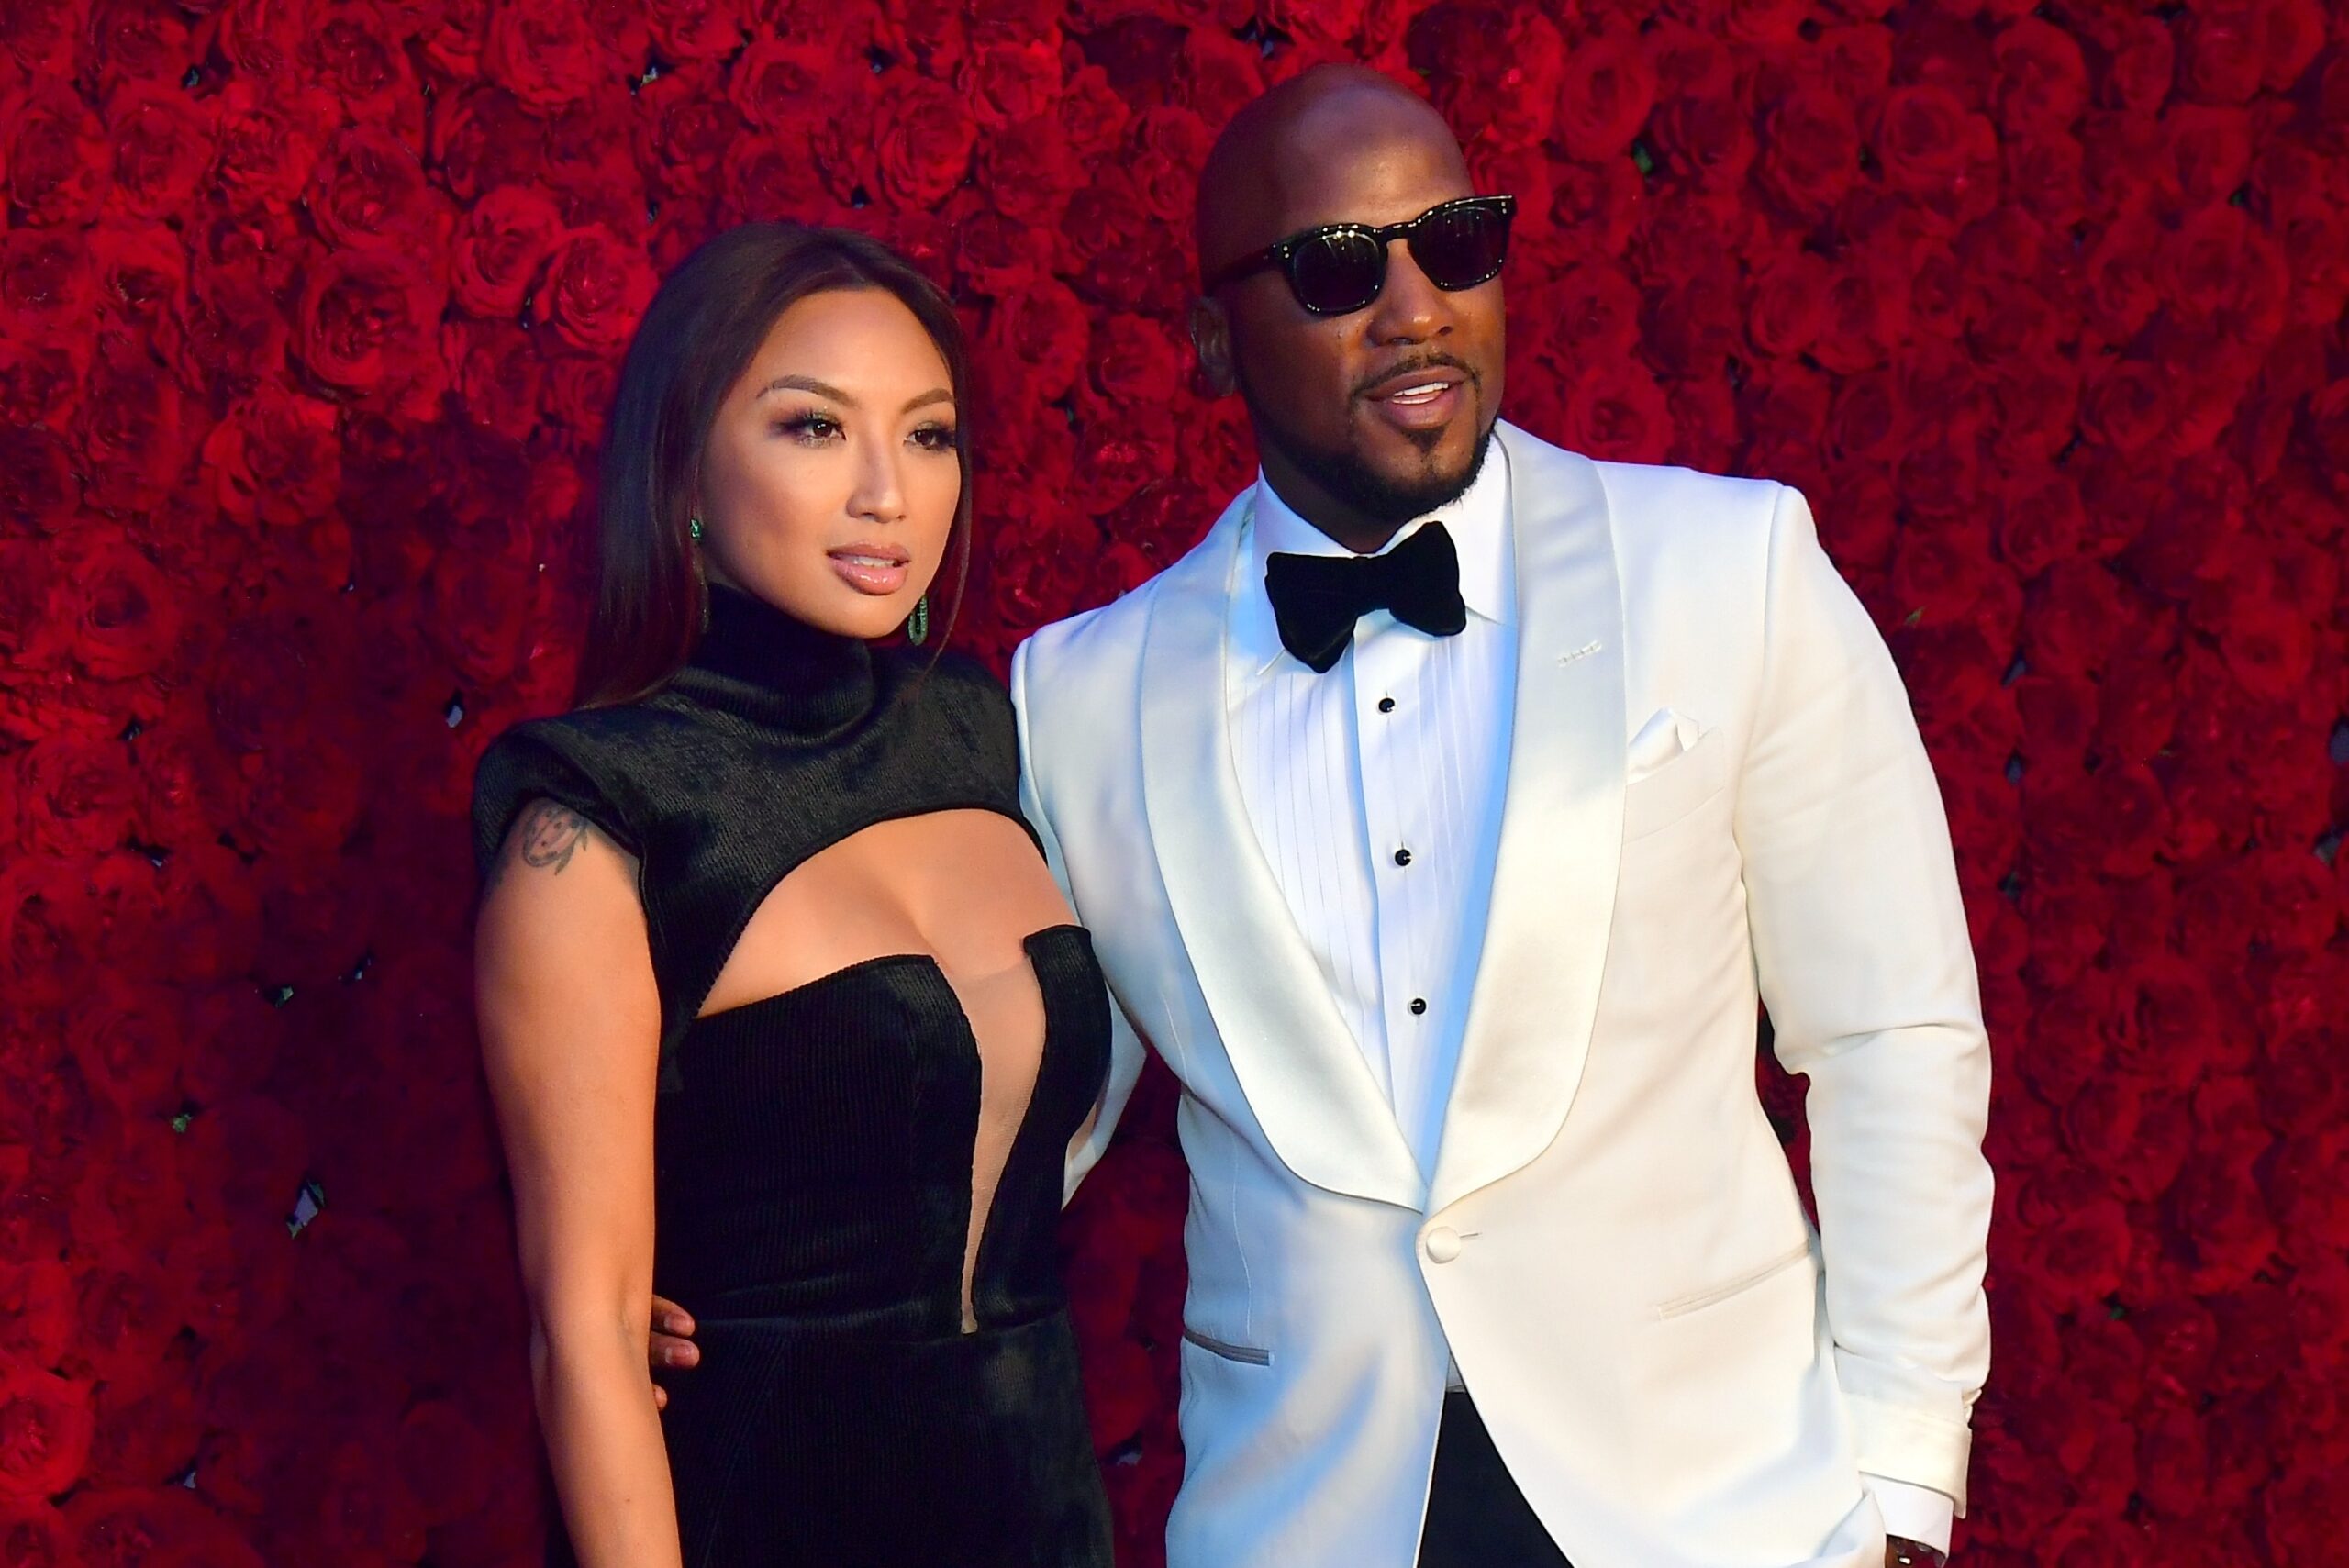 Jeannie Mai Accuses Jeezy Of Domestic Violence And Child Neglect Amid Divorce